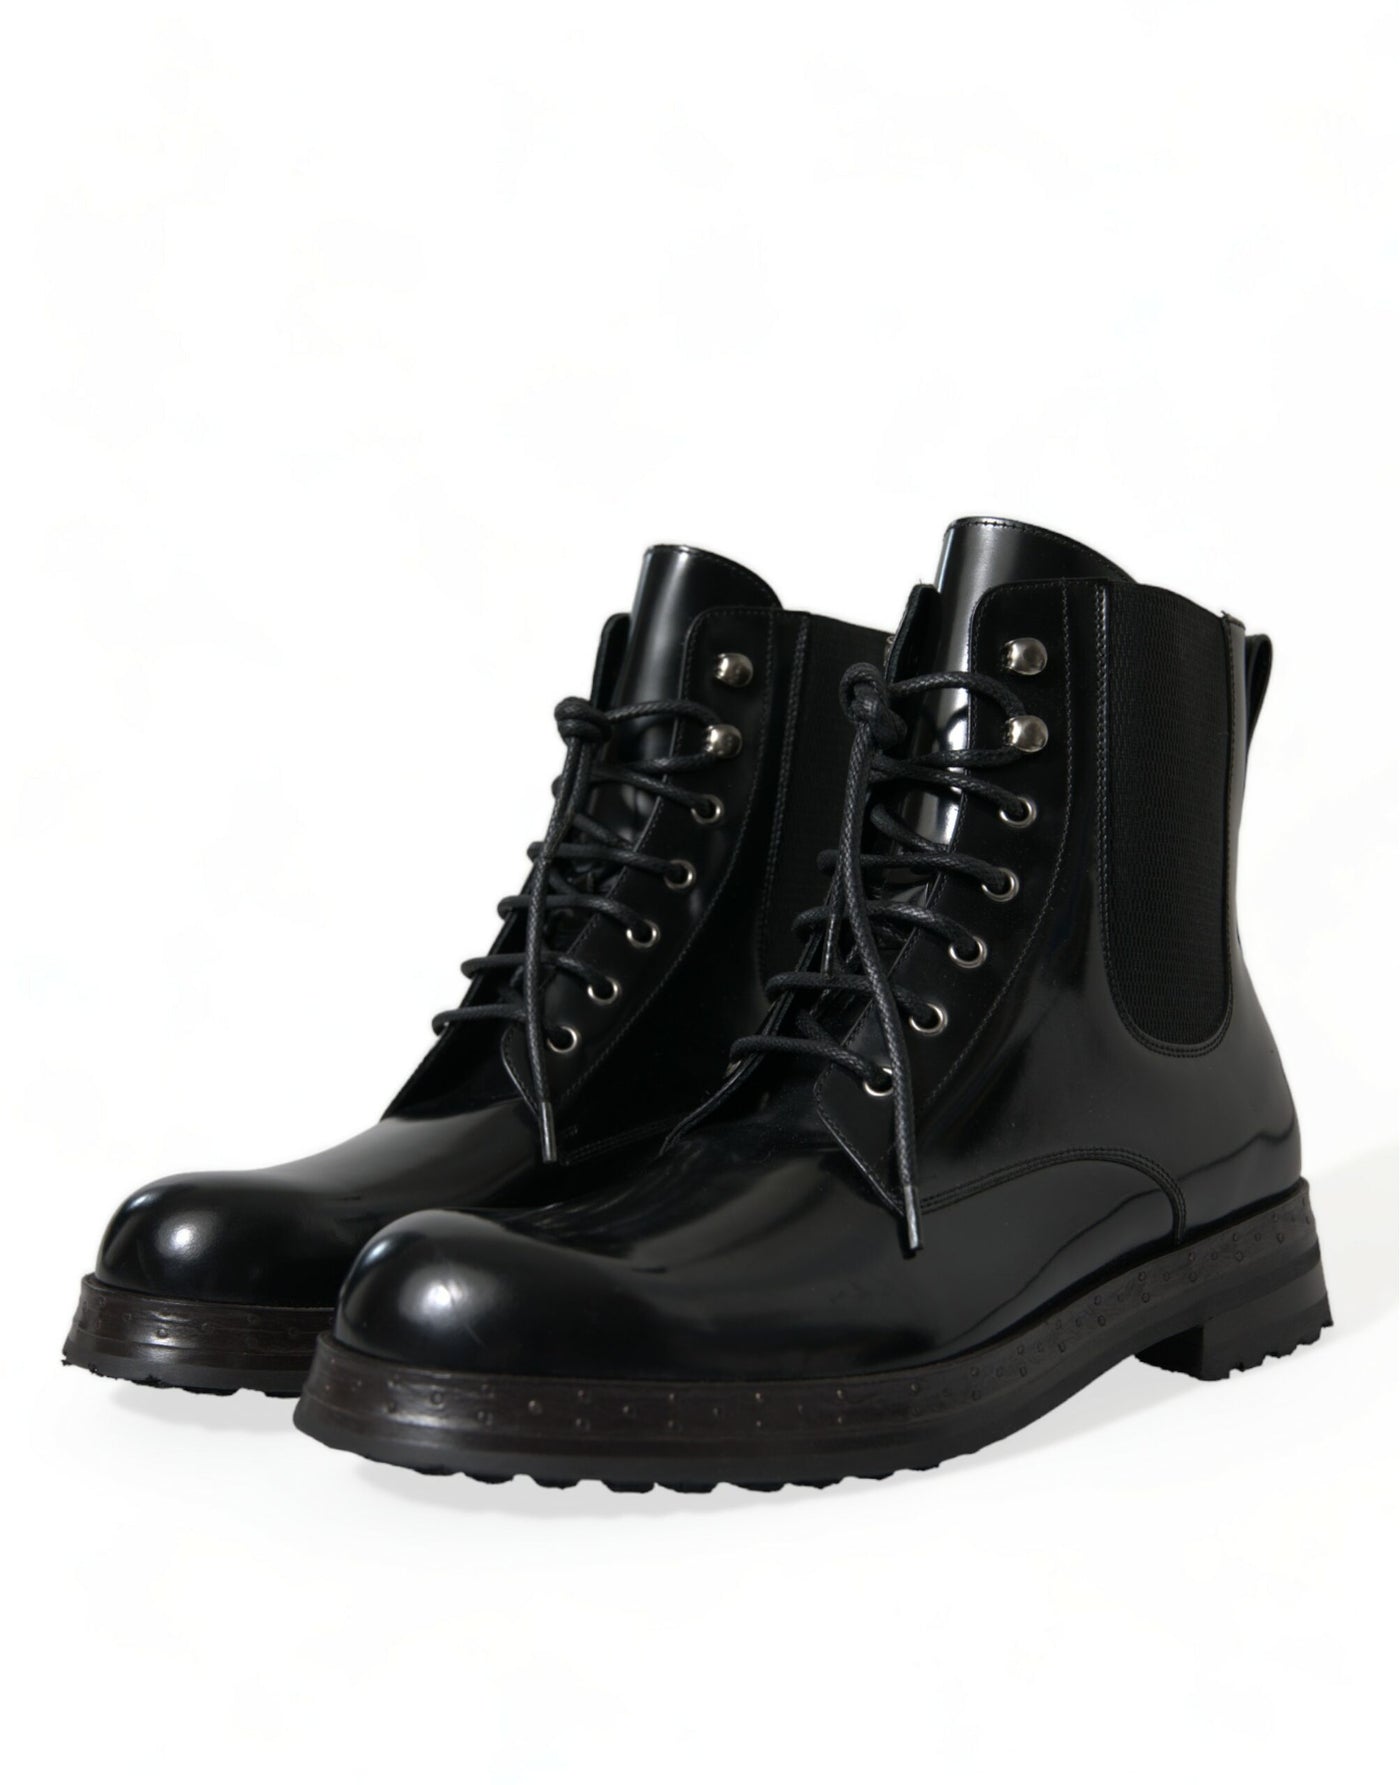 Dolce & Gabbana Black Leather Lace Up Mid Calf Boots Shoes